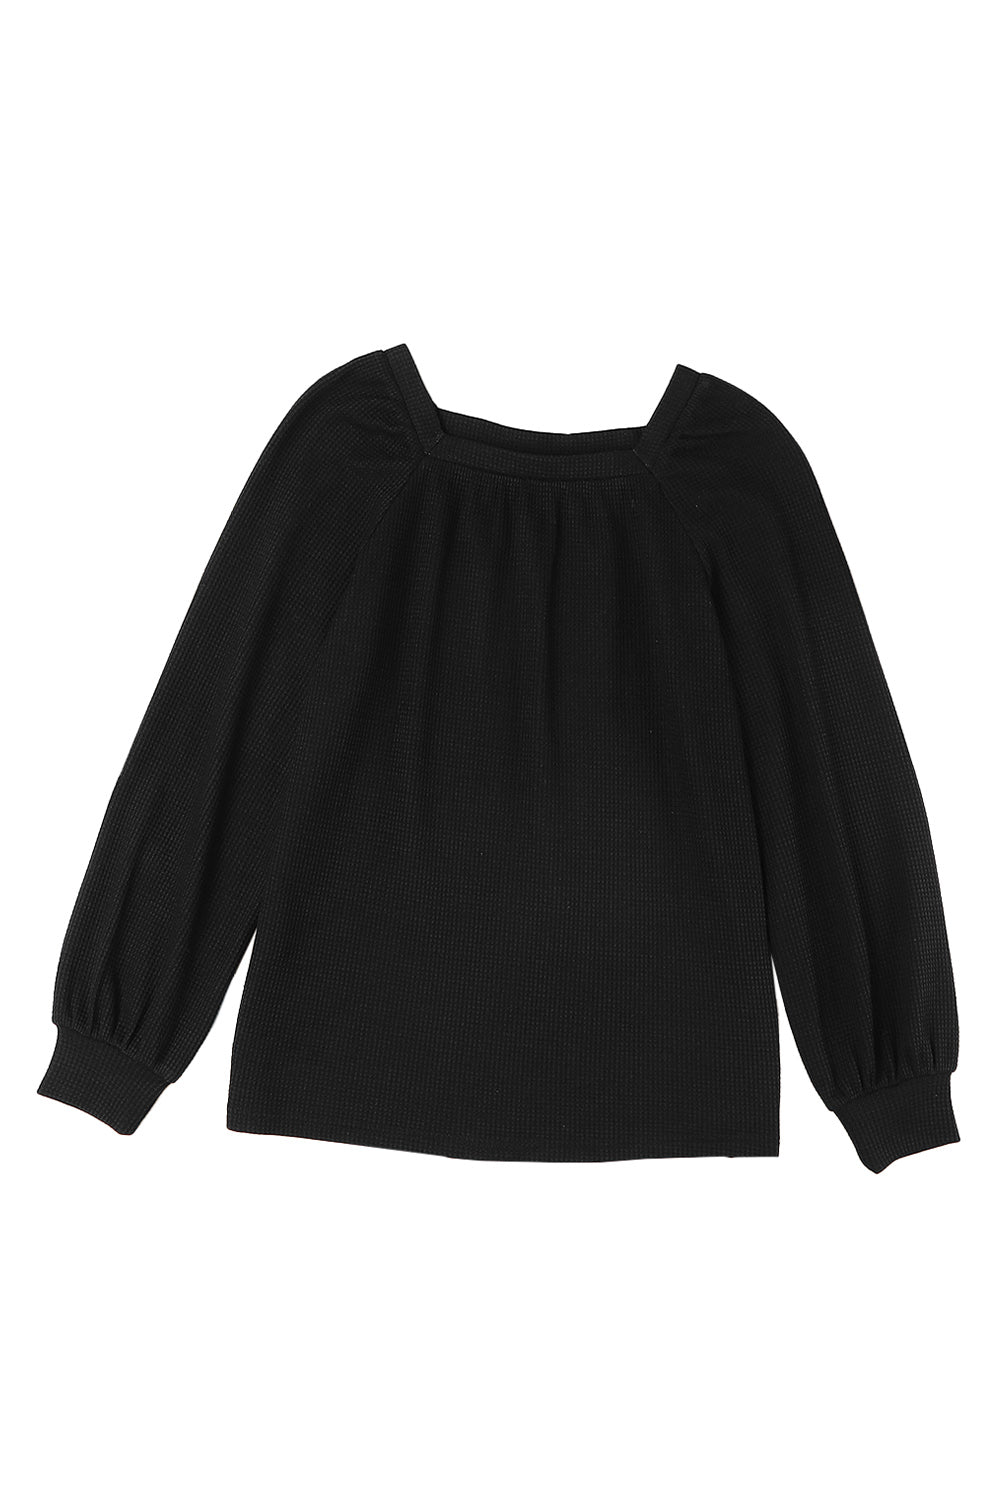 Black Scoop Neck Puff Sleeve Waffle Knit Top